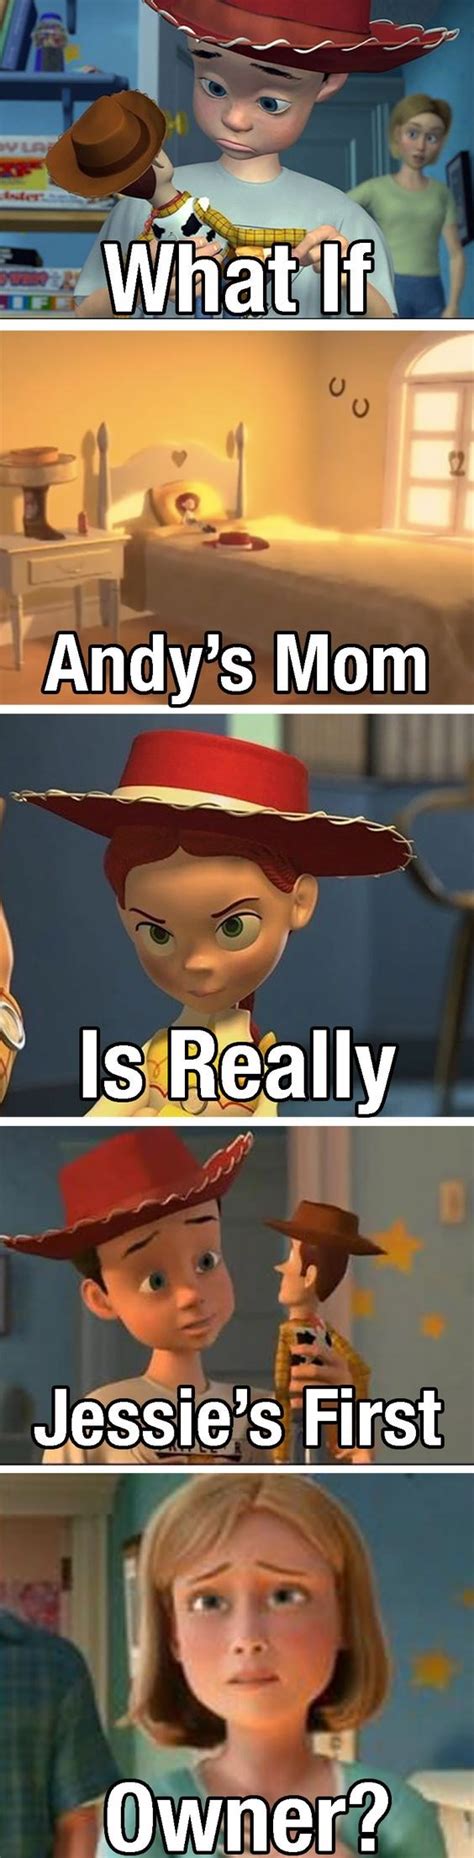 This Pixar Fan Theory Reveals The Secret Identity Of Andys Mom In Toy